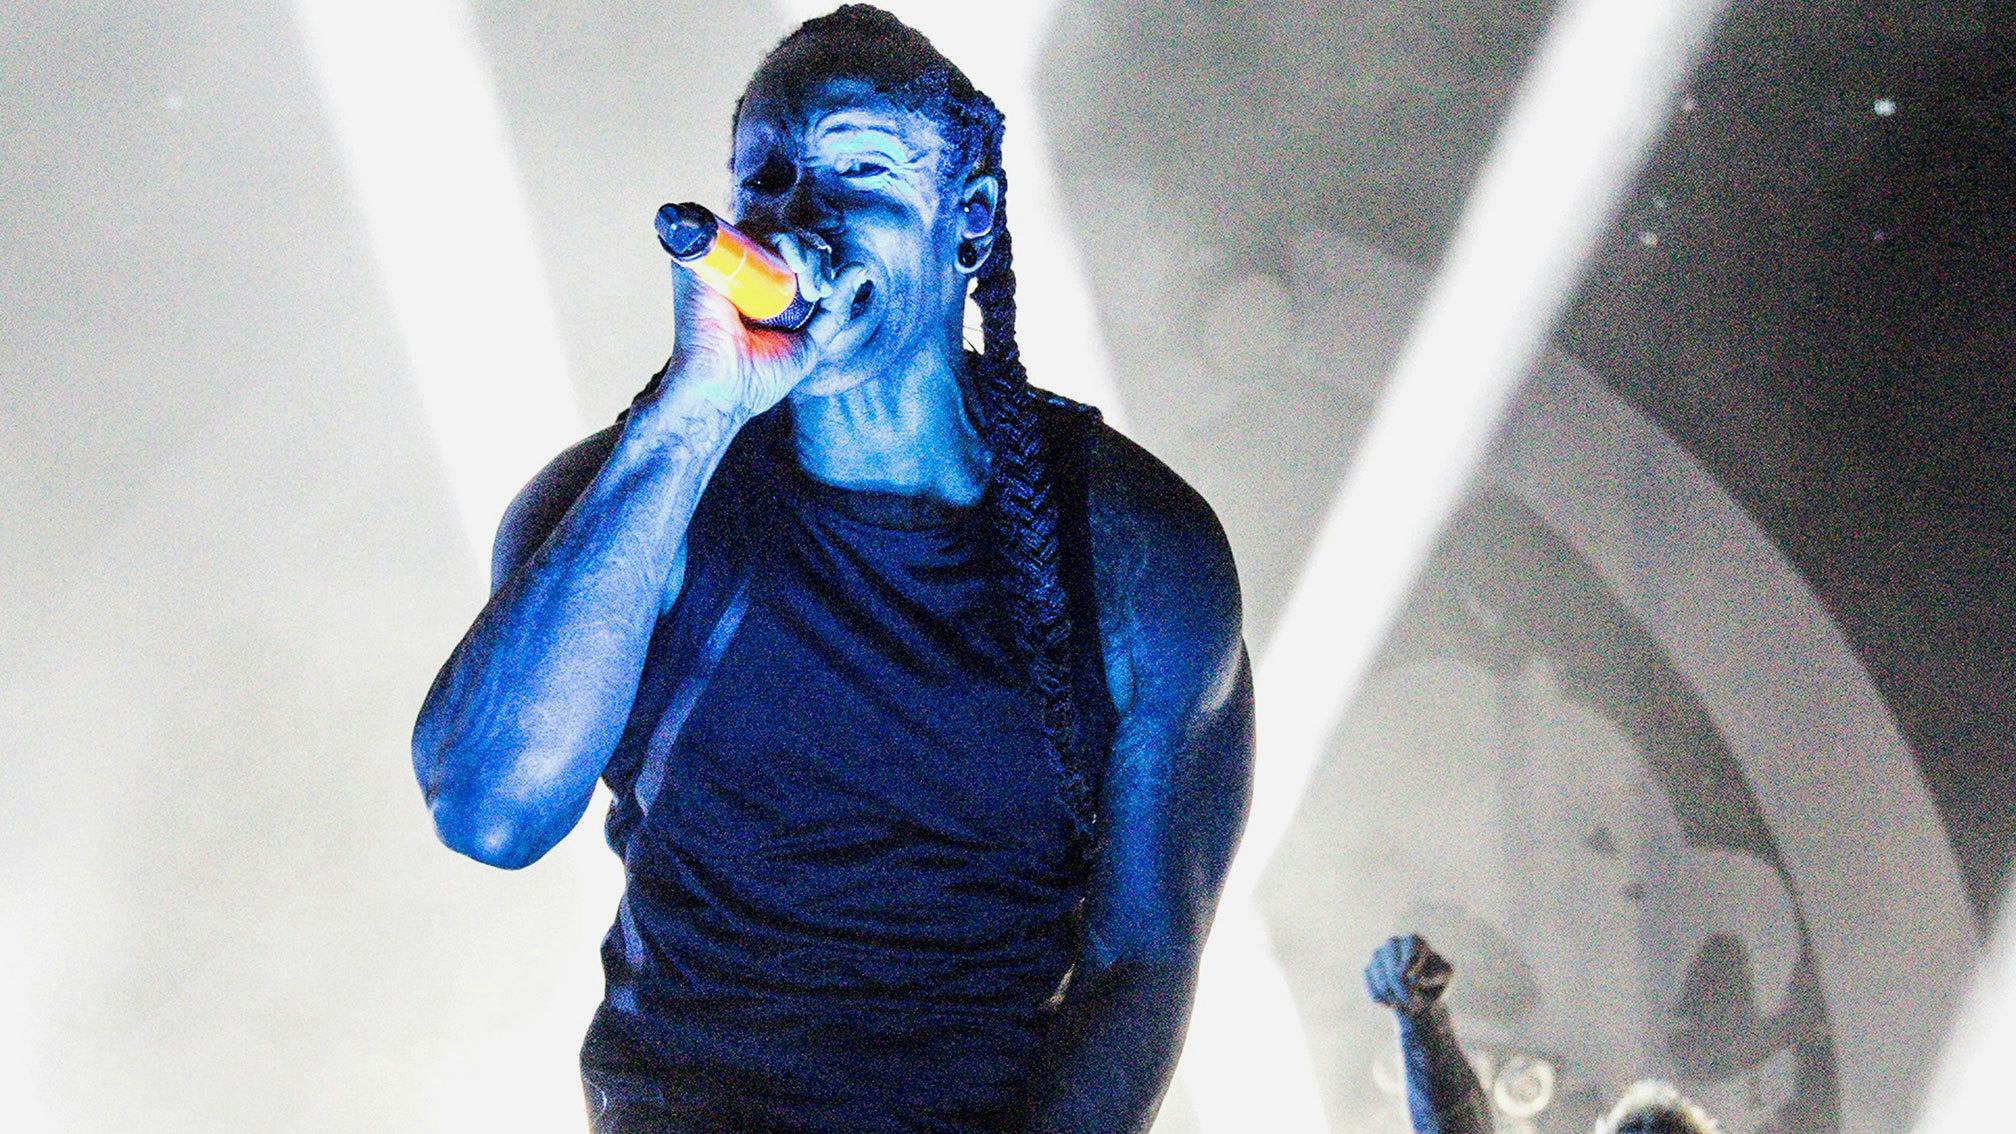 This is The Prodigy’s setlist from their first show since Keith Flint’s death